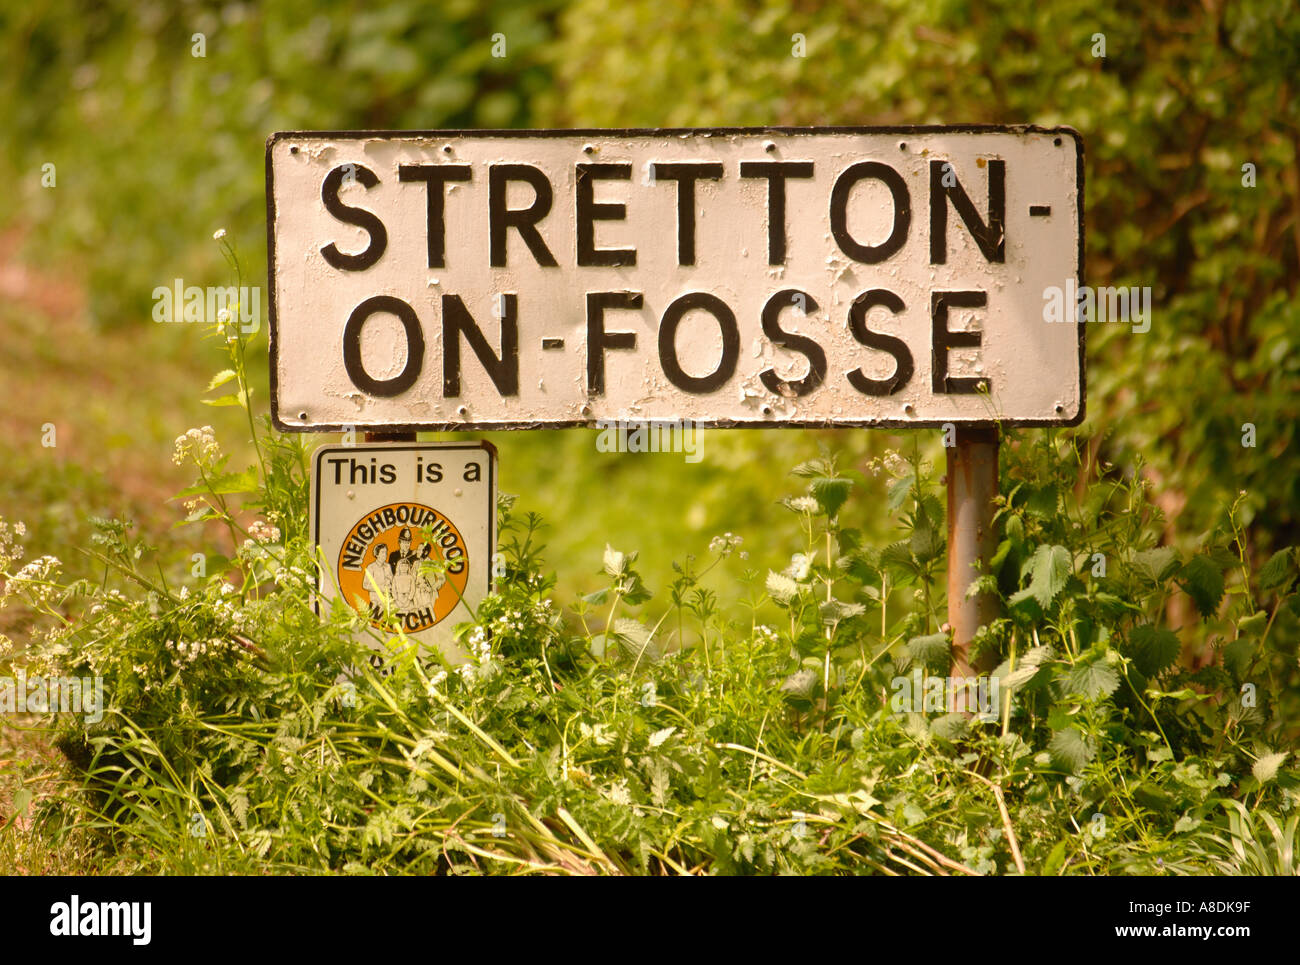 A ROAD SIGN ON THE OUTSKIRTS OF THE VILLAGE OF STRETTON ON FOSSE WARWICKSHIRE UK Stock Photo